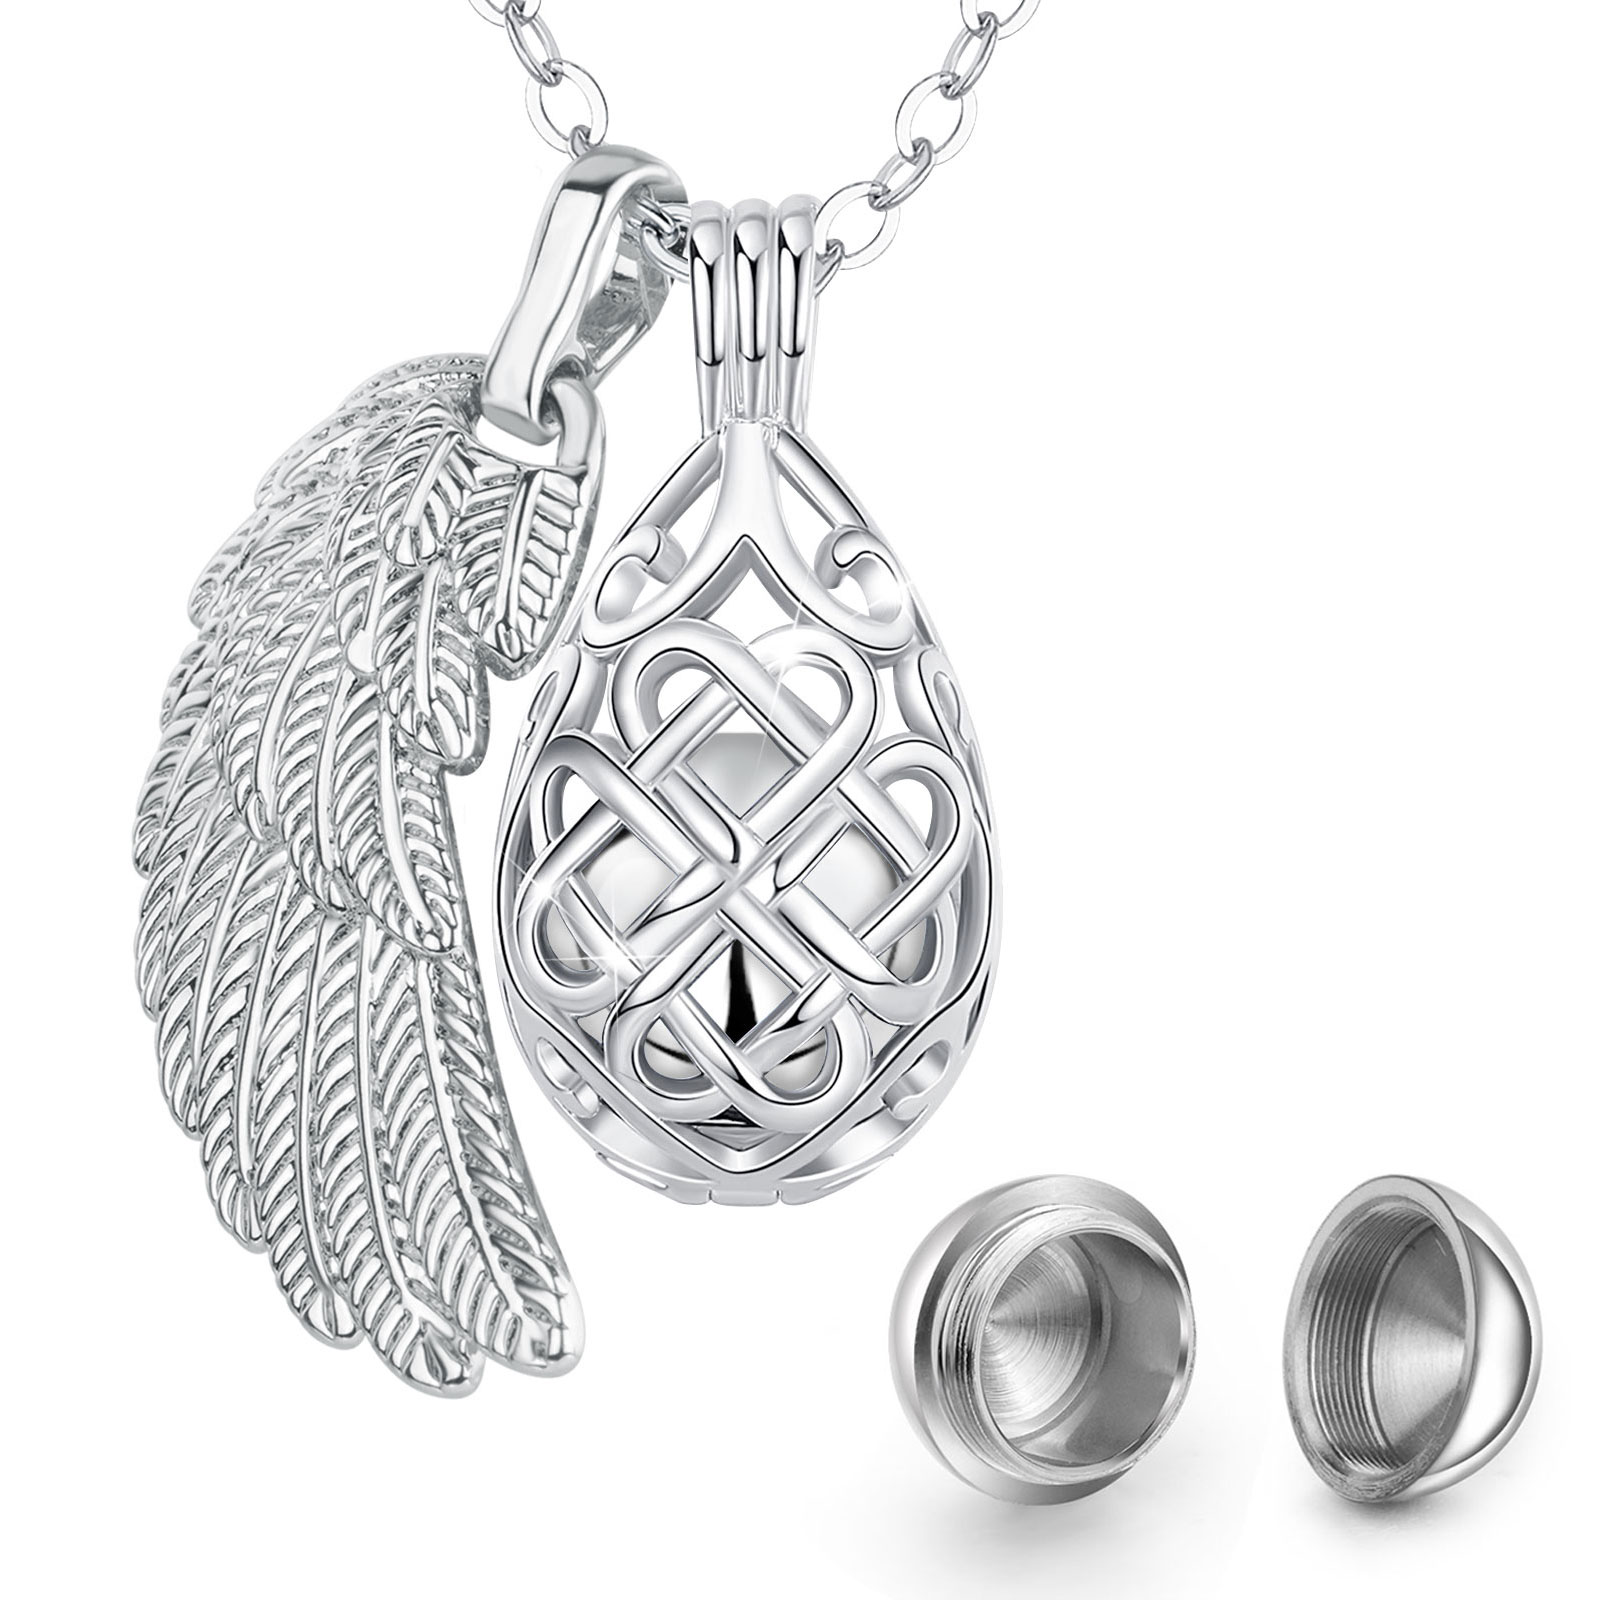 Merryshine Jewelry Cremation Hollow Teardrop Shape Memorial Keepsake Ashes Urn Necklace with Angel Wing